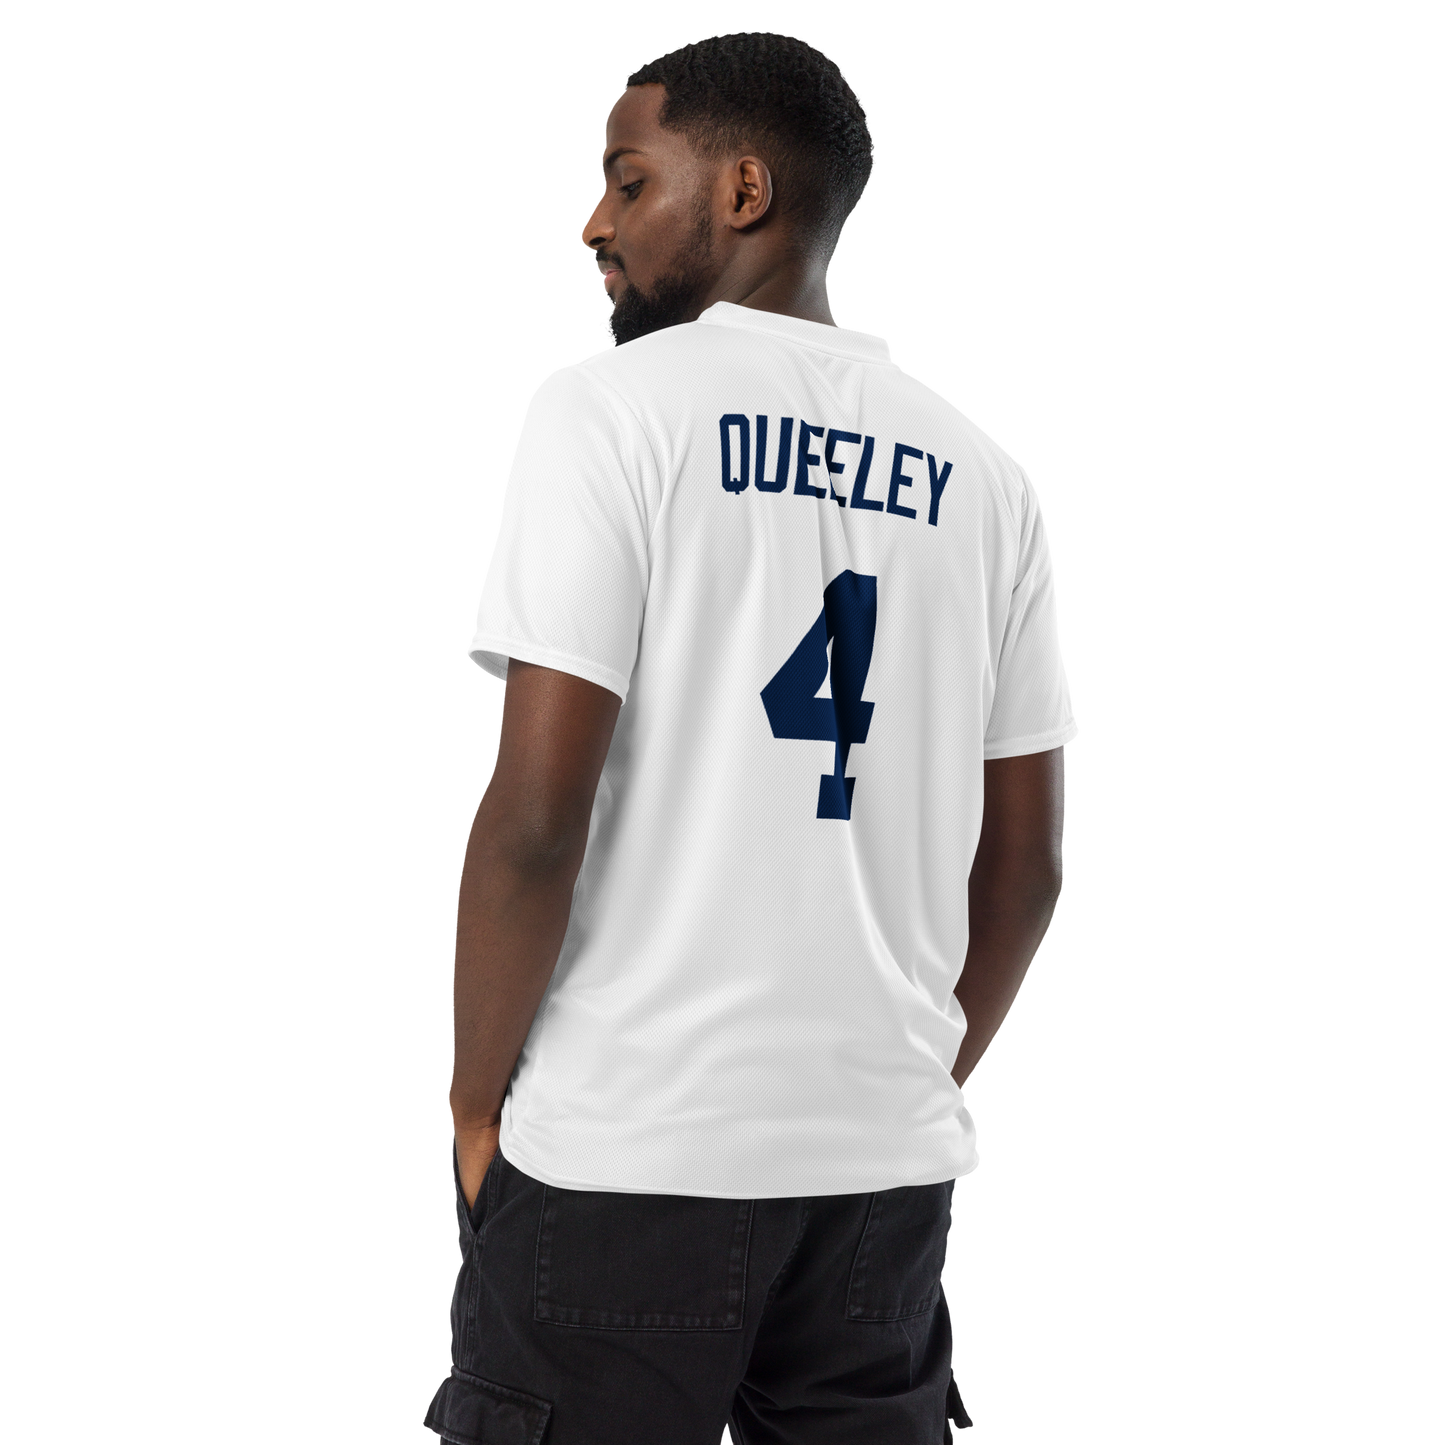 QUEELEY AWAY SHIRTSY